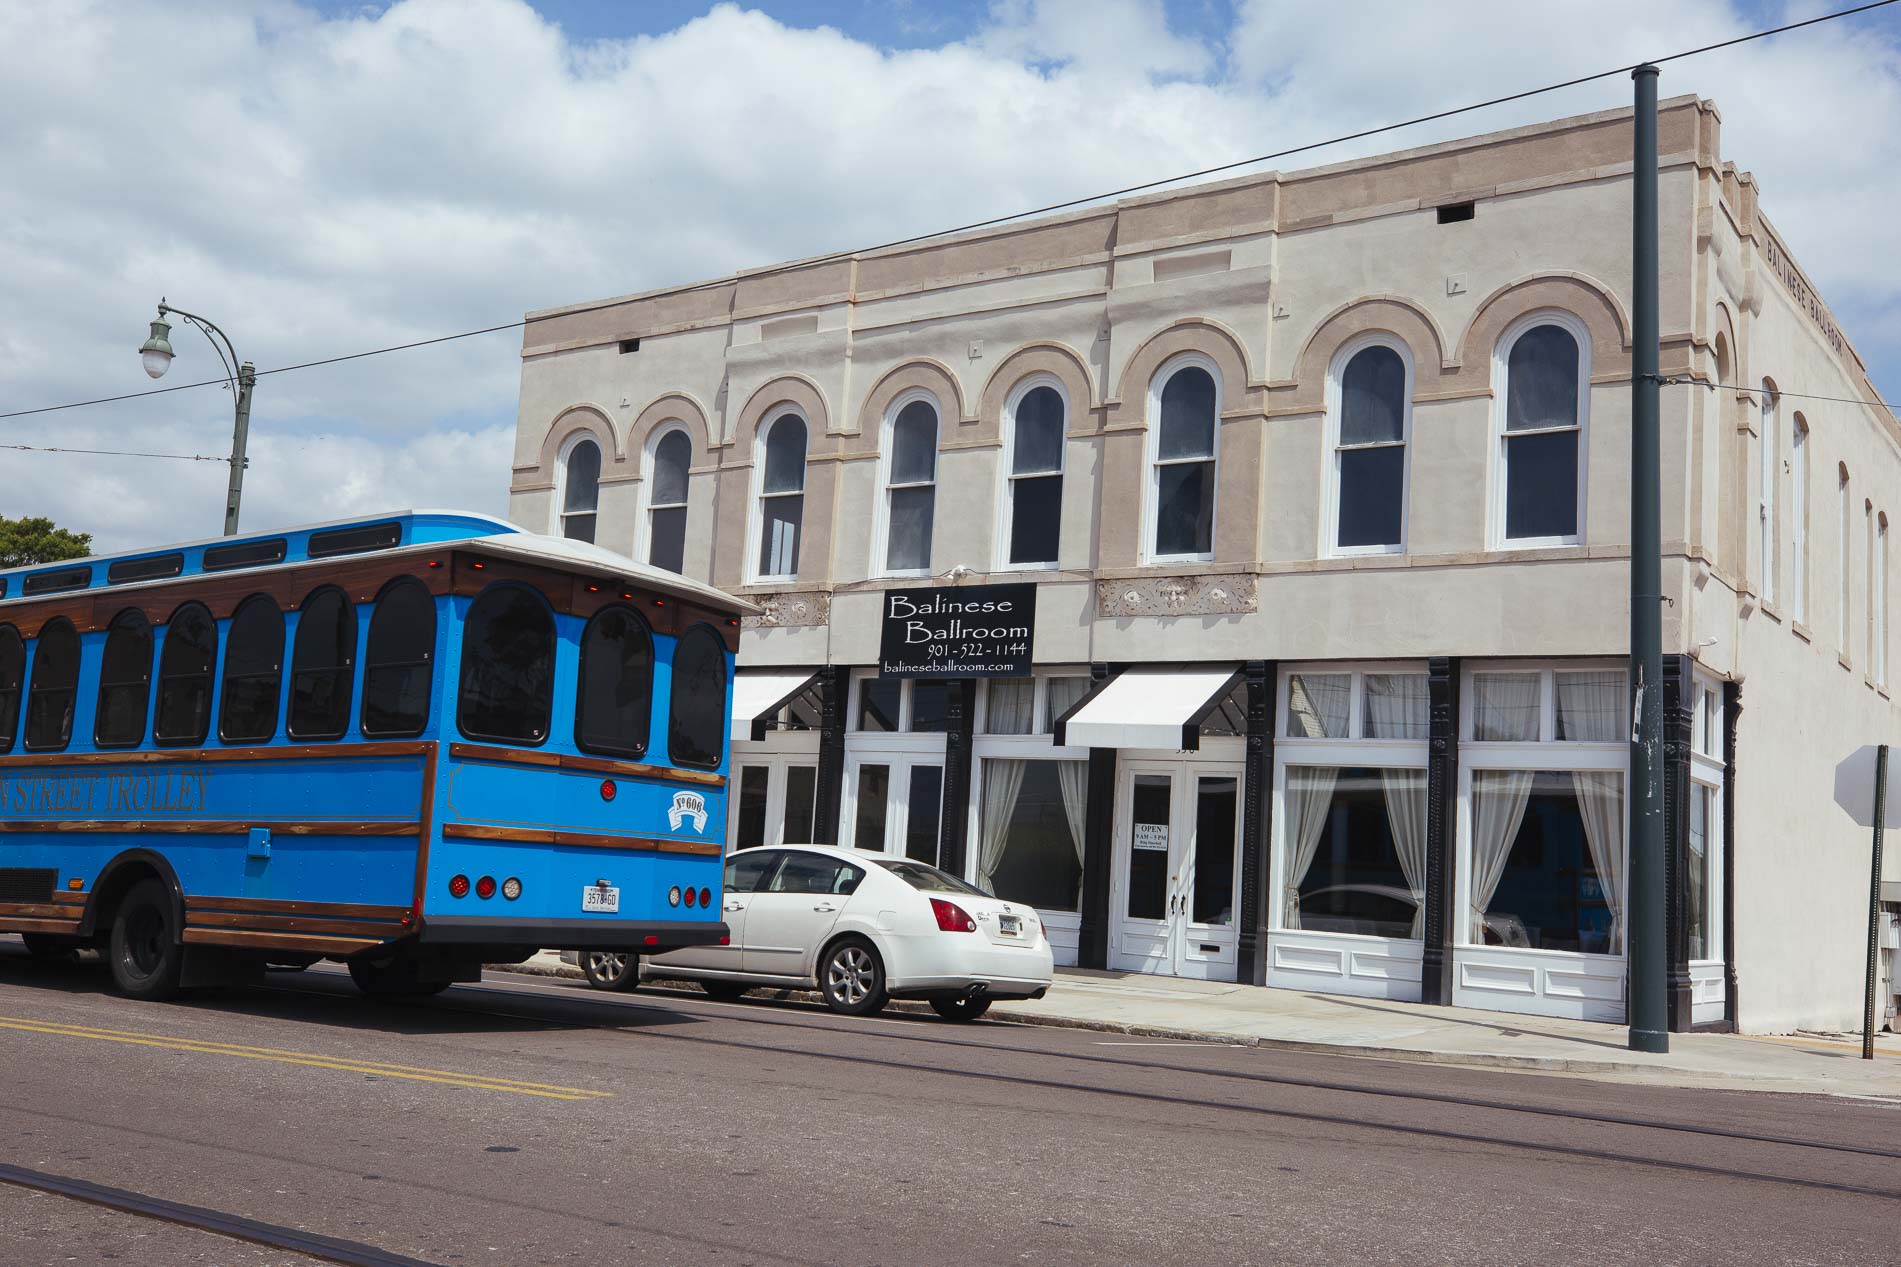 A Memphis bus trolley passes in front of the Balinese Ballroom in the Pinch District. (Ziggy Mack)